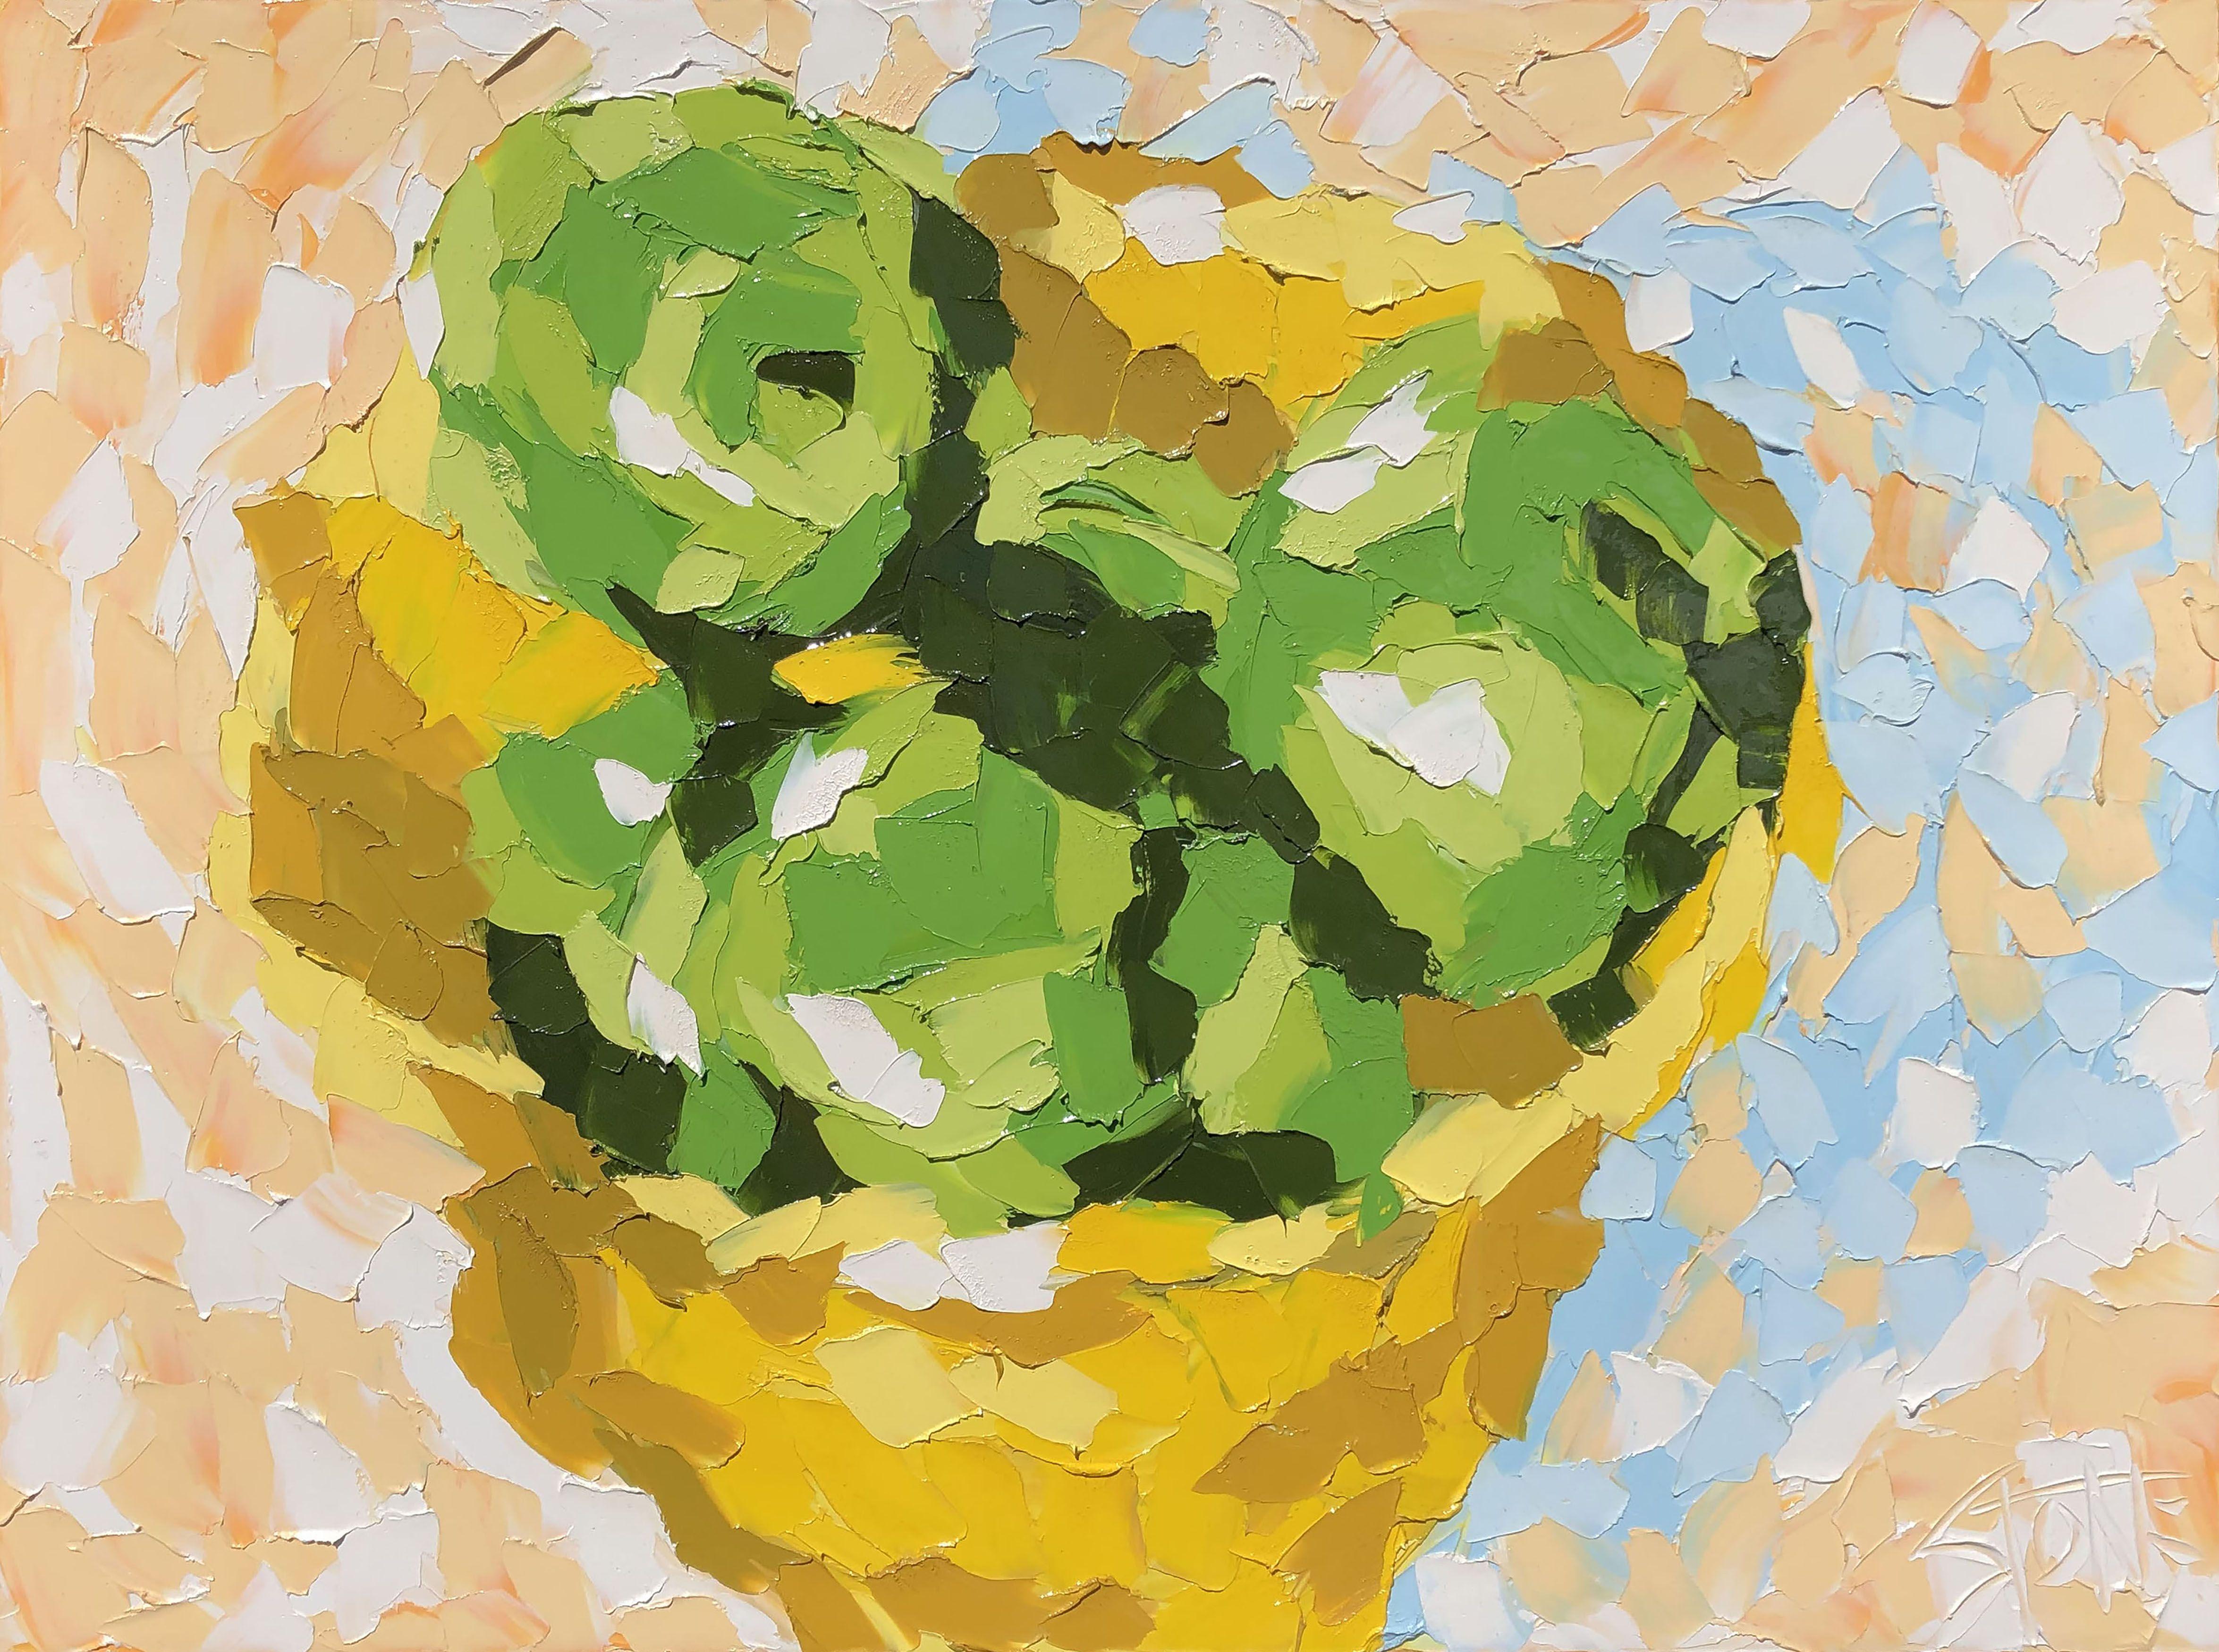 Freshly picked green apples in a bright yellow bowl. :: Painting :: Abstract Expressionism :: This piece comes with an official certificate of authenticity signed by the artist :: Ready to Hang: Yes :: Signed: Yes :: Signature Location: bottom right